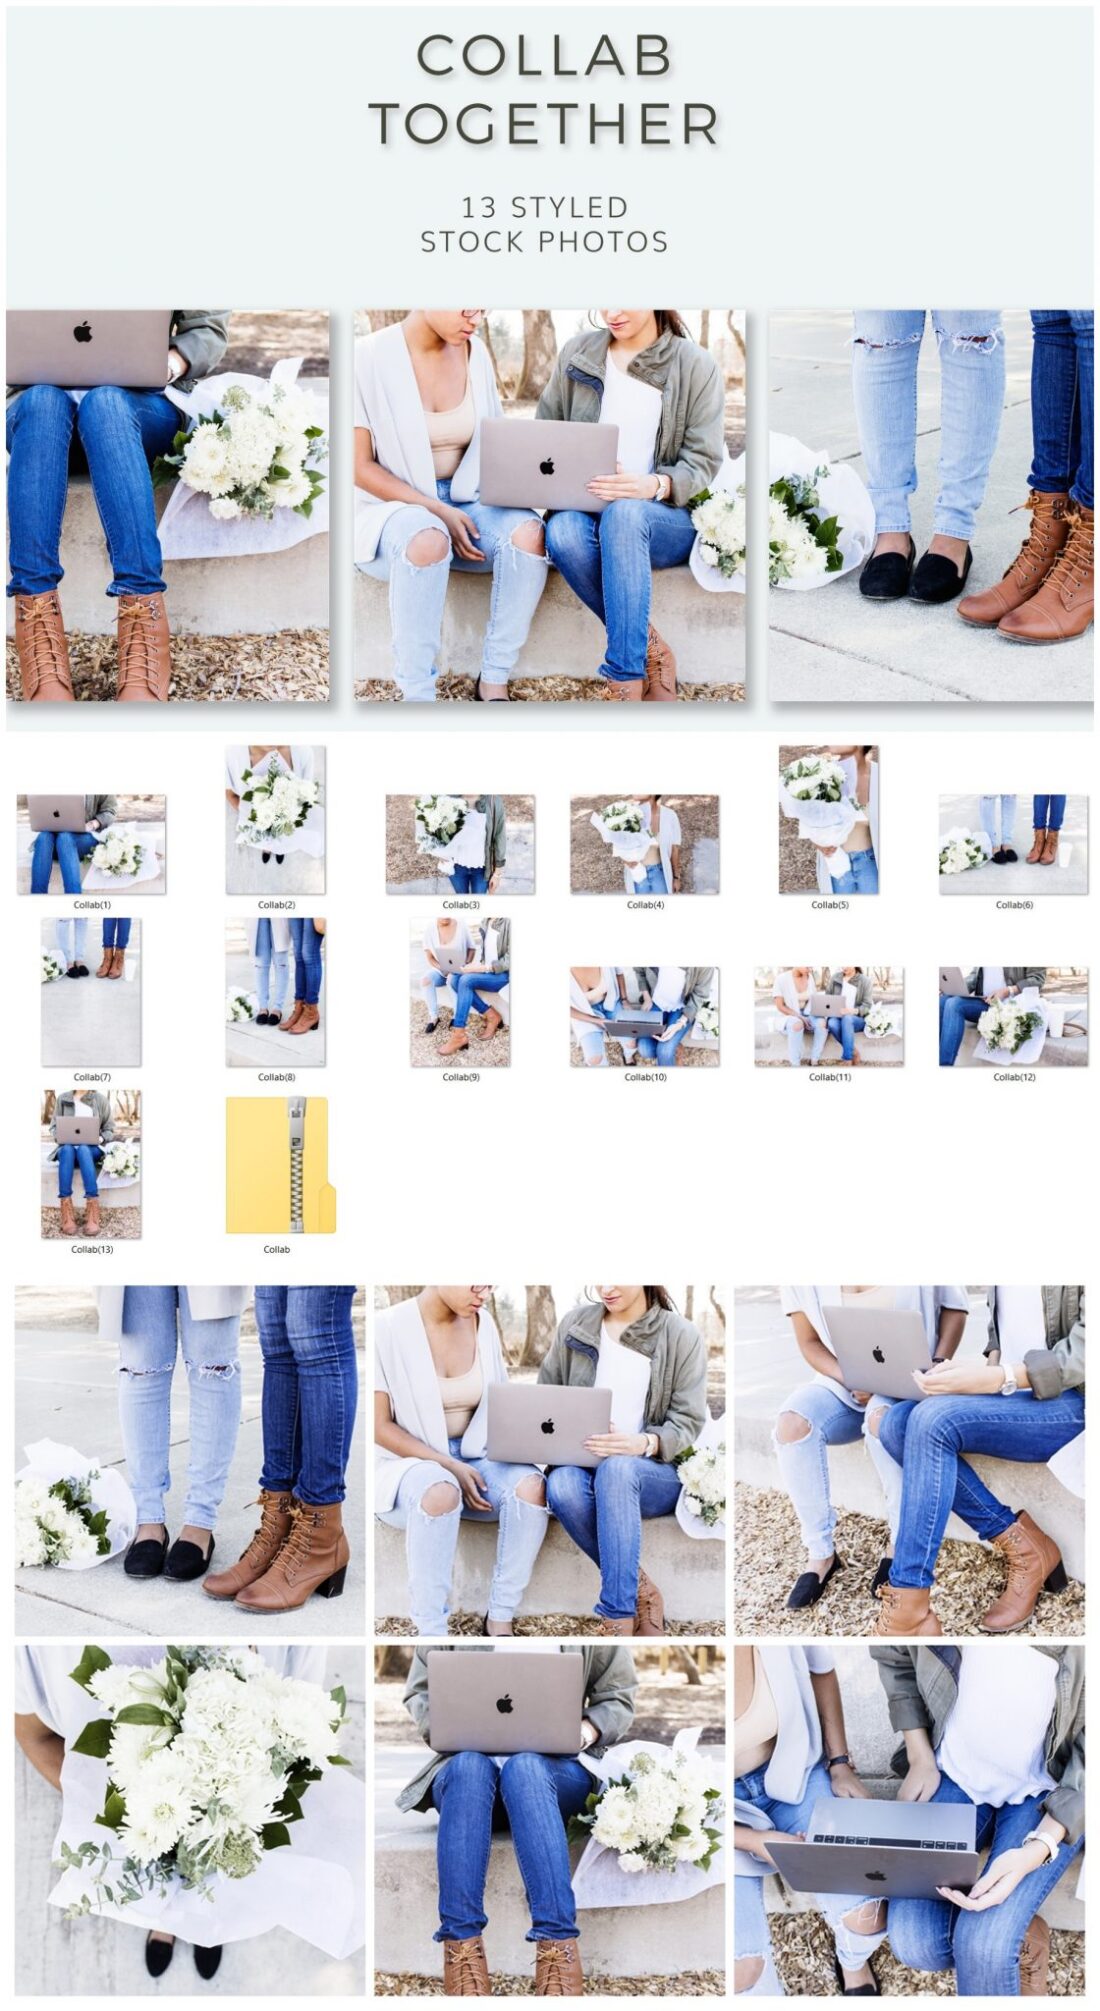 Styled stock photos _ Collaborate together for influencers and social media. Denim, Floral, macbook, friends and more